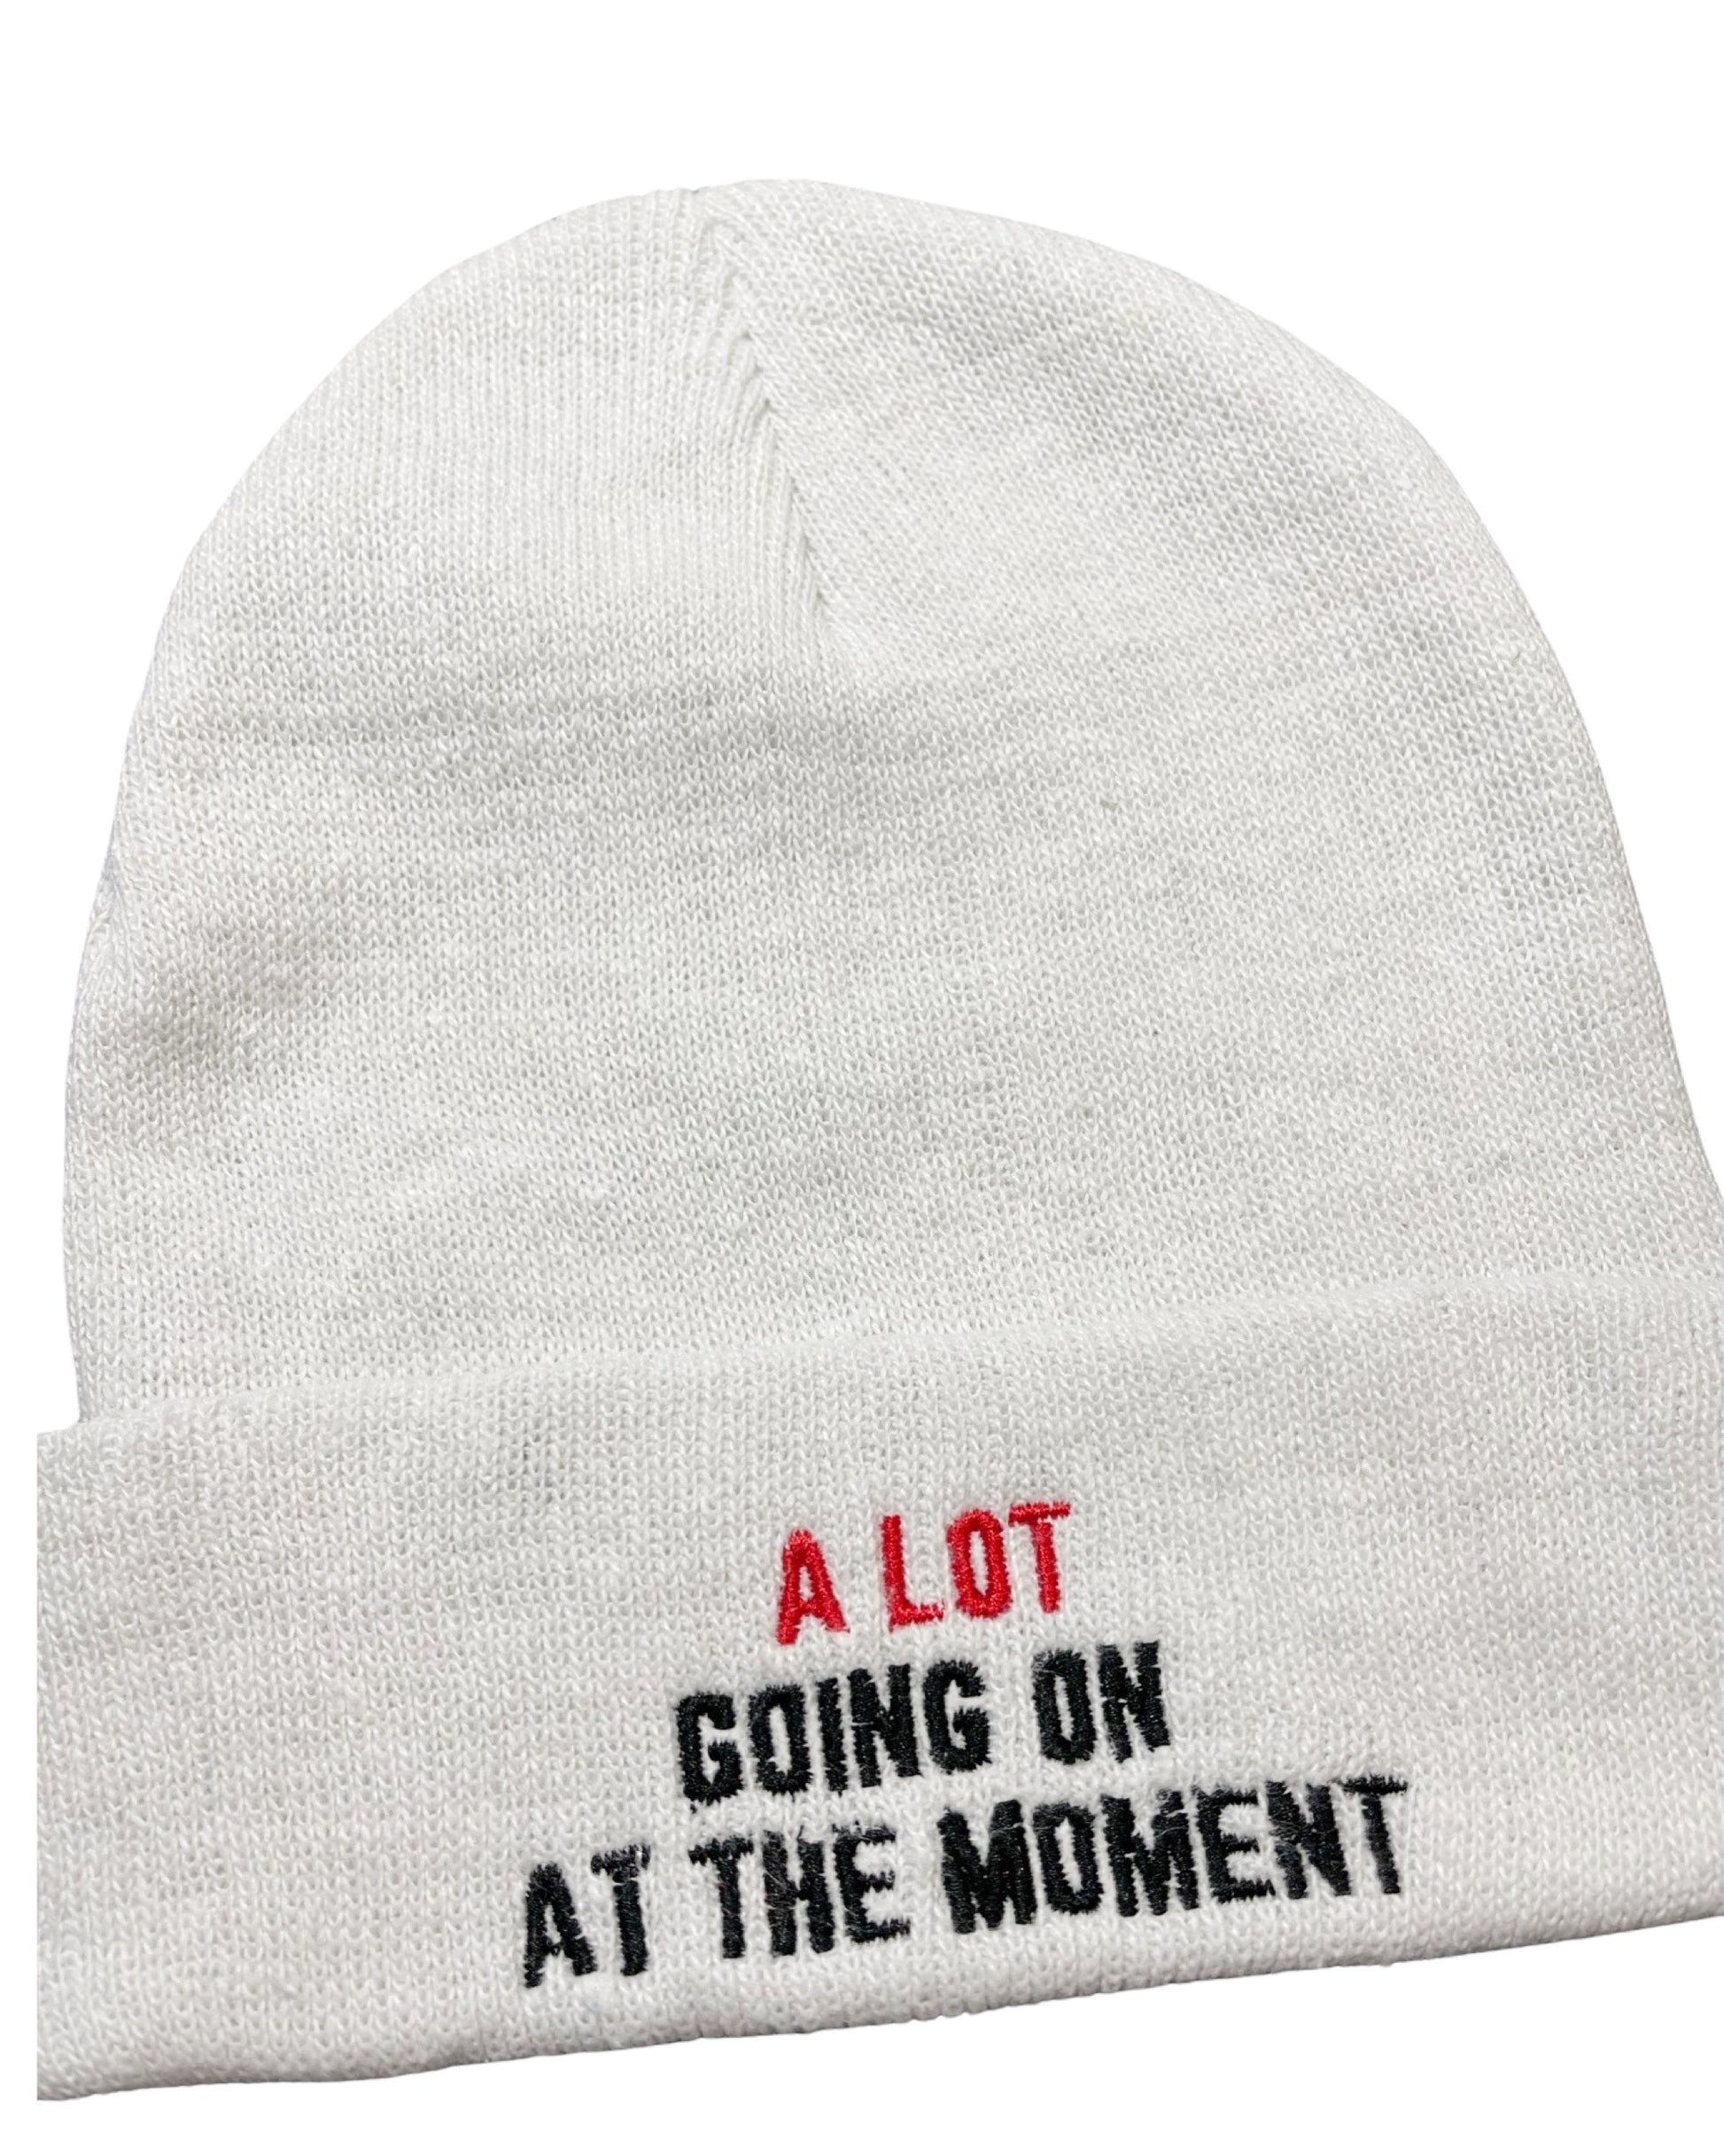 white knit beanie embroidered with "a lot going on at the moment" like the t shirt t swift wears on eras tour during the Red Era